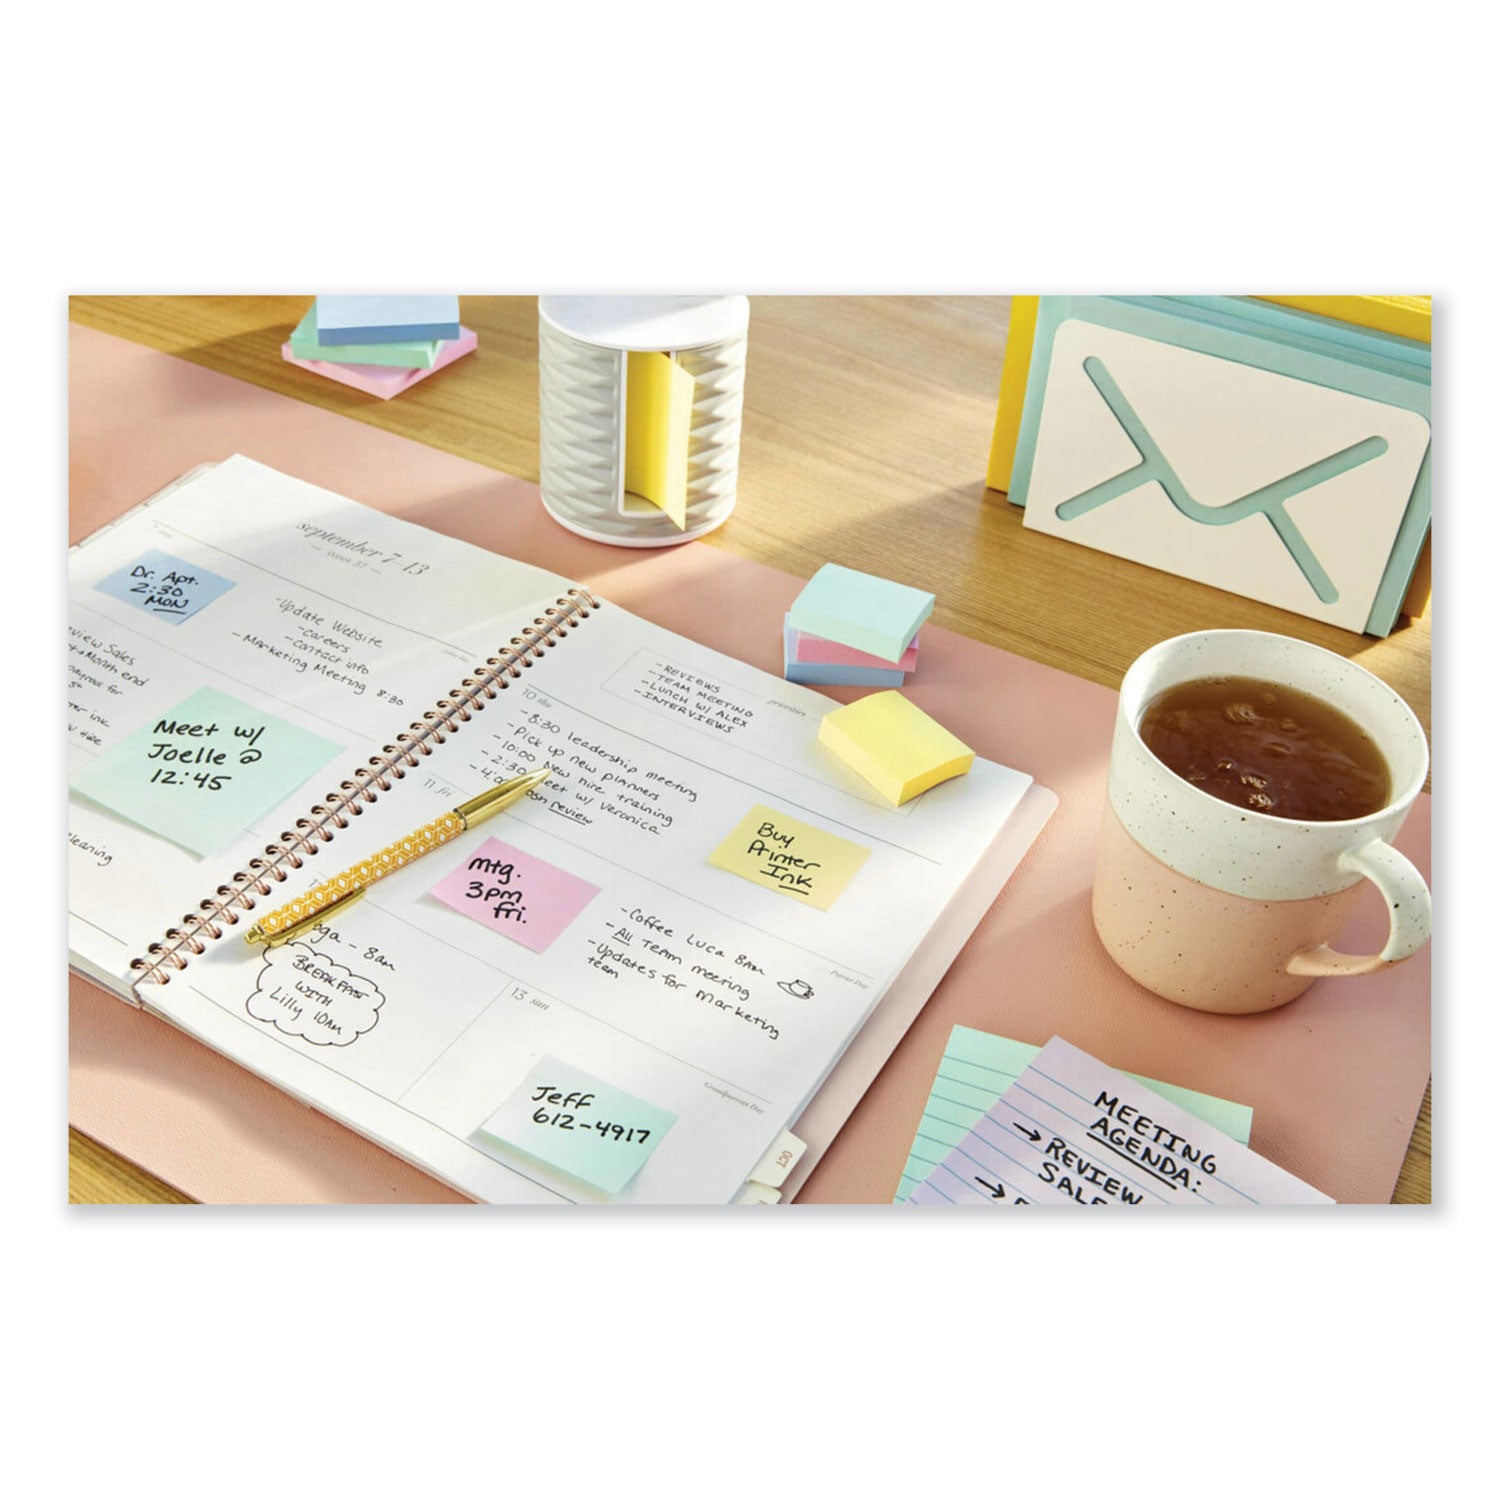 original-pads-in-canary-yellow-value-pack-138-x-188-100-sheets-pad-24-pads-pack_mmm65324vad - 3